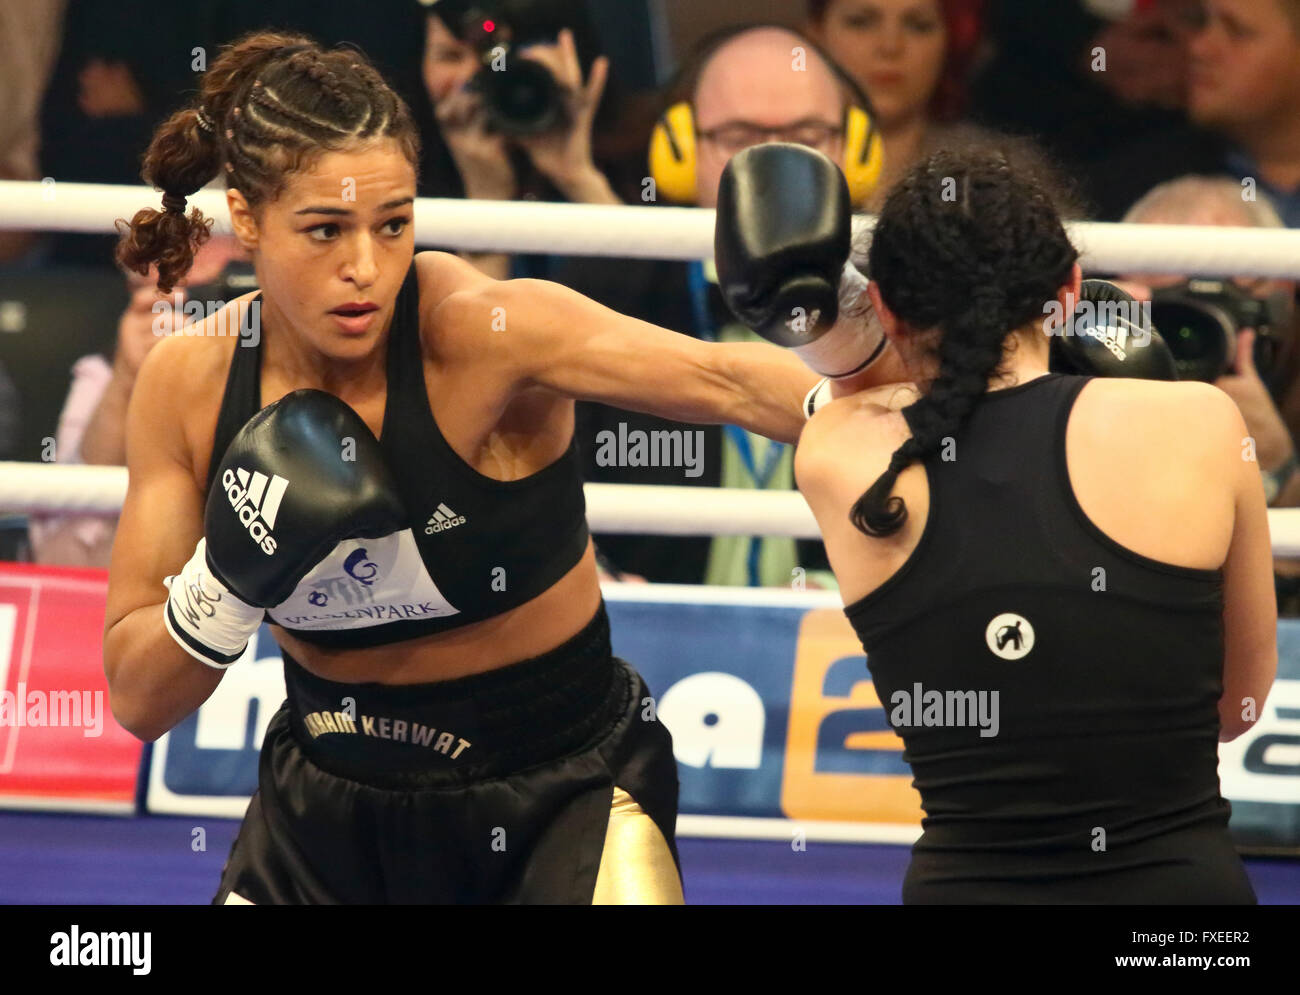 Ladies boxing between Ikram Kerwat (Germany) and Gina Chamie (Hungary) for the vacant WBC lightweight title, Potsdam, Germany, April 2016 Stock Photo